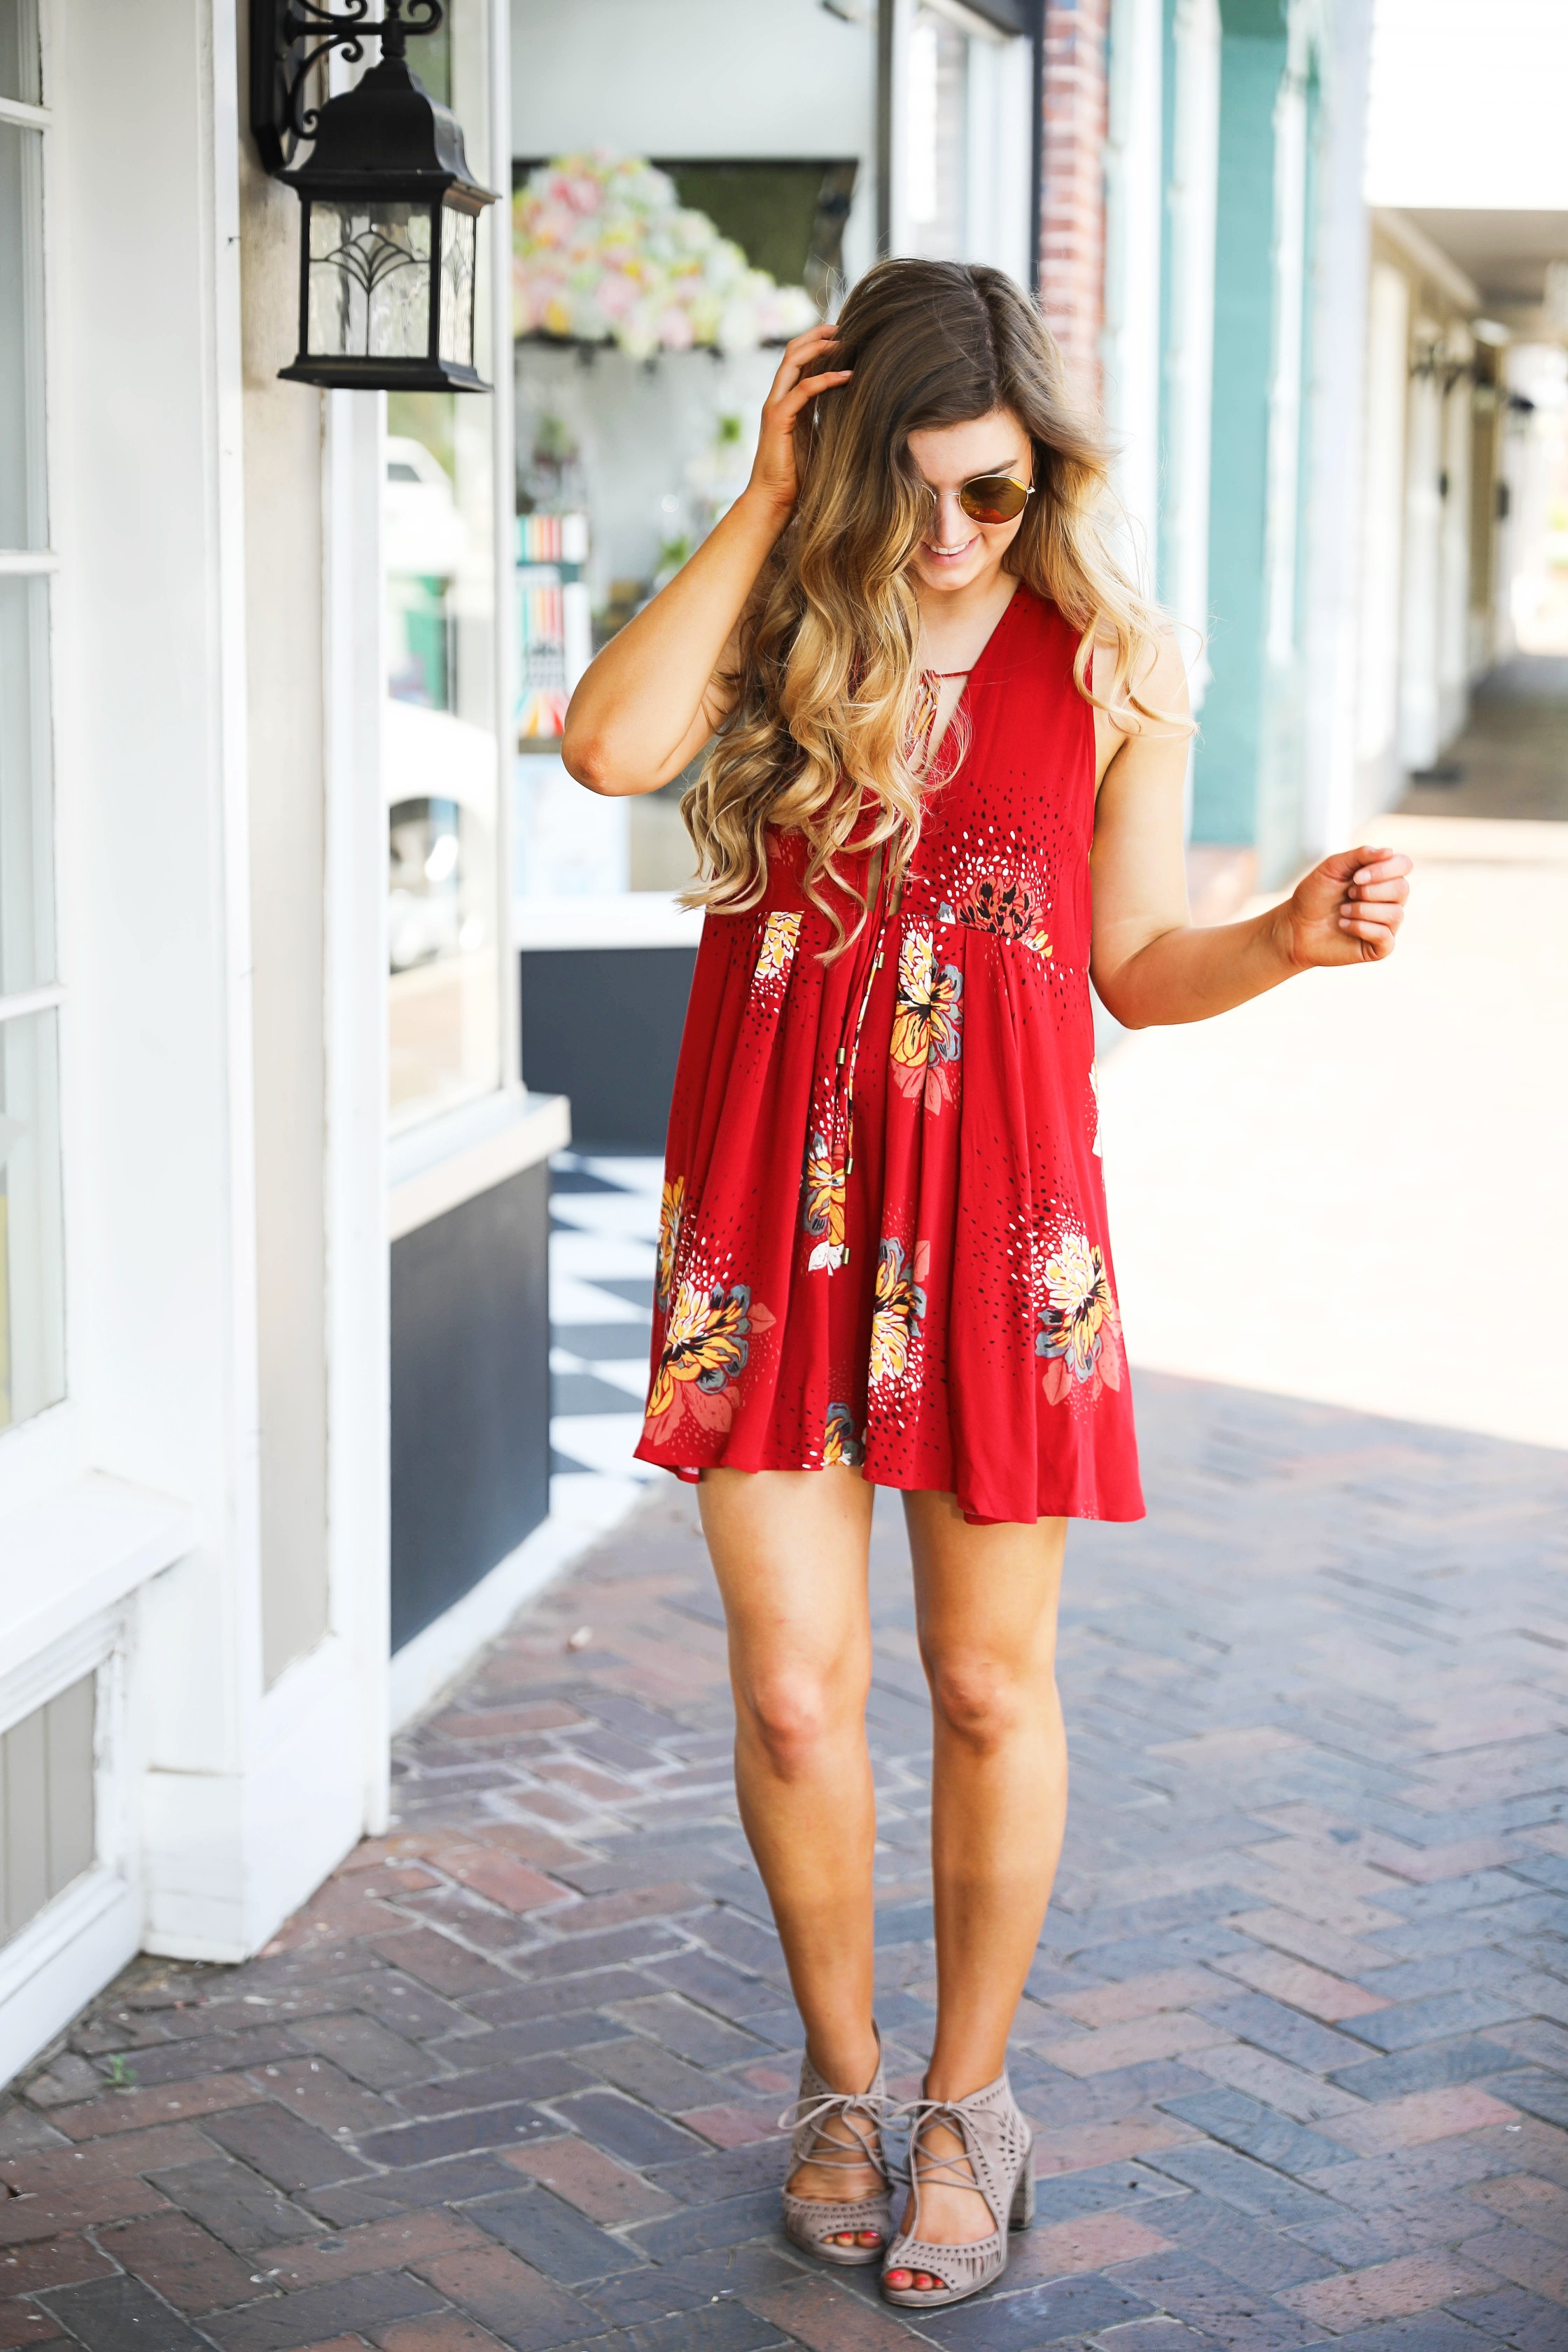 Free People Coachella Inspired Dress with Fun $12 Sunglasses! Cute spring fashion! by Lauren Lindmark on Daily Dose of Charm dailydoseofcharm.com